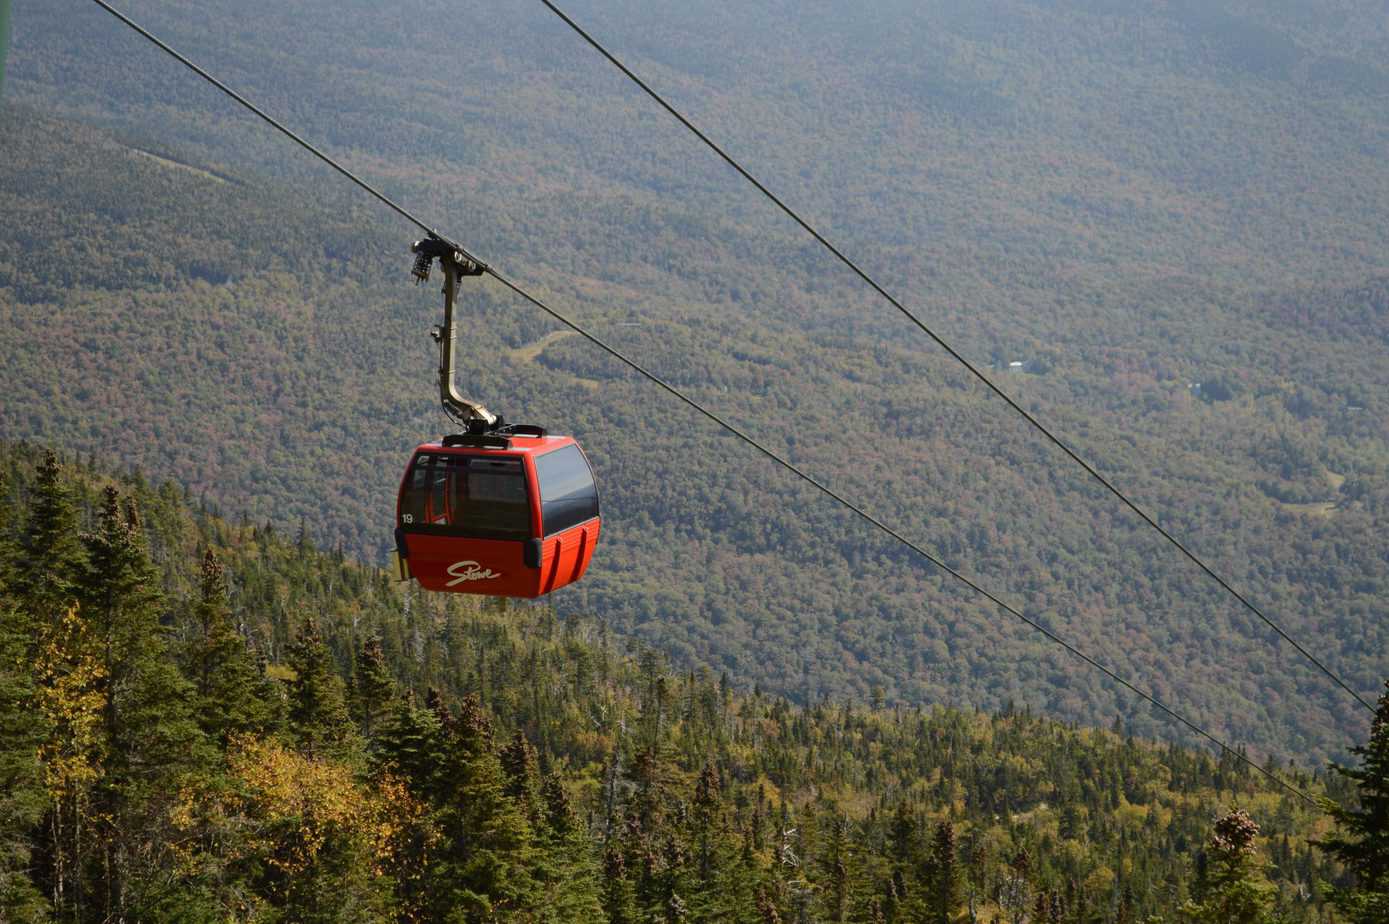 A red cable car lifts people high up in the mountains.